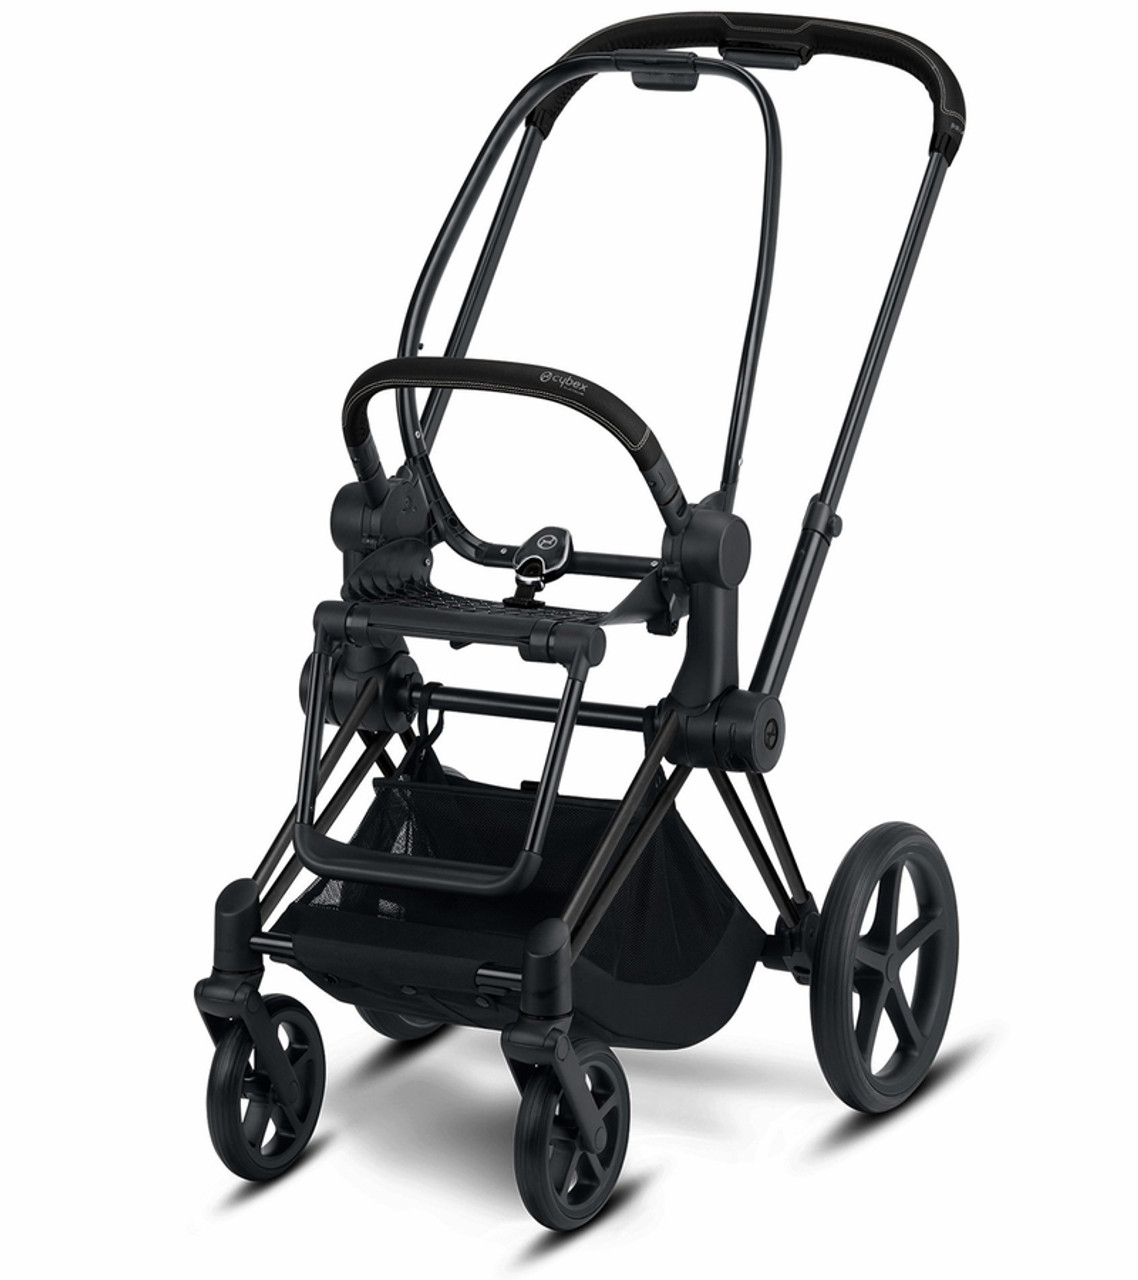 Cybex e-Priam stroller review: Is it worth the price? - Reviewed